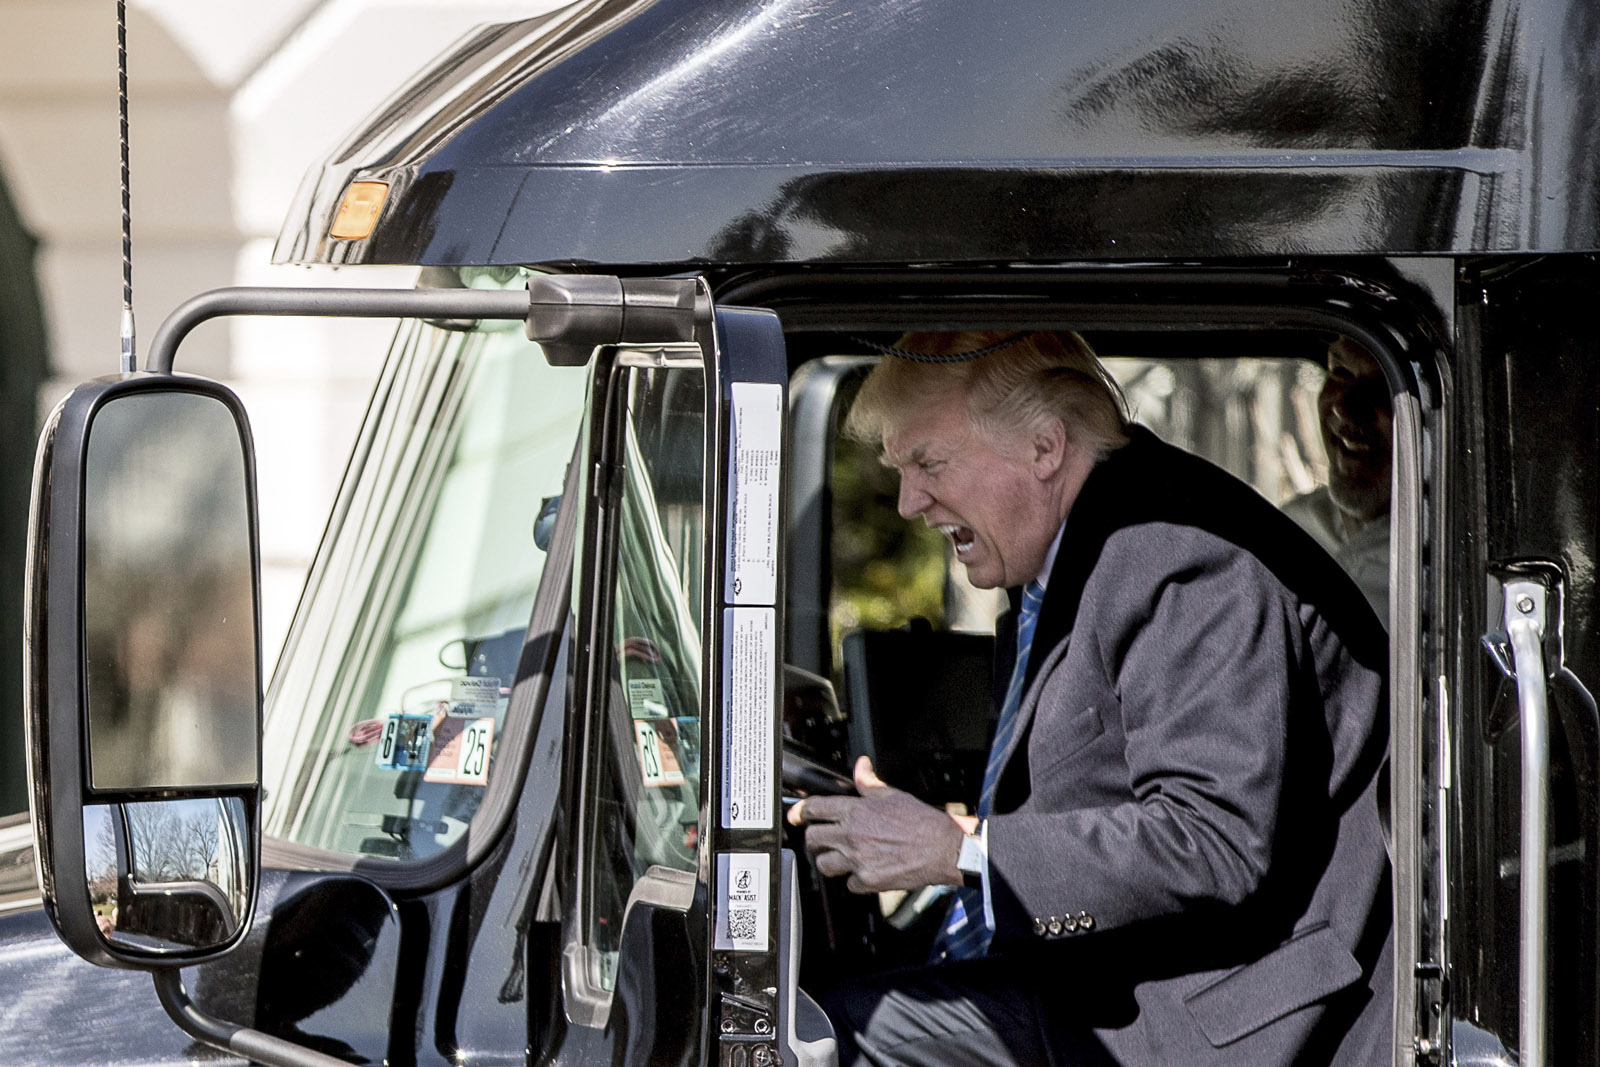 President Donald Trump pretends to drive as he gets in an 18-wheeler as he meets with truckers and CEOs regarding healthcare on the South Lawn of the White House, Thursday, March 23, 2017, in Washington. (AP Photo/Andrew Harnik)